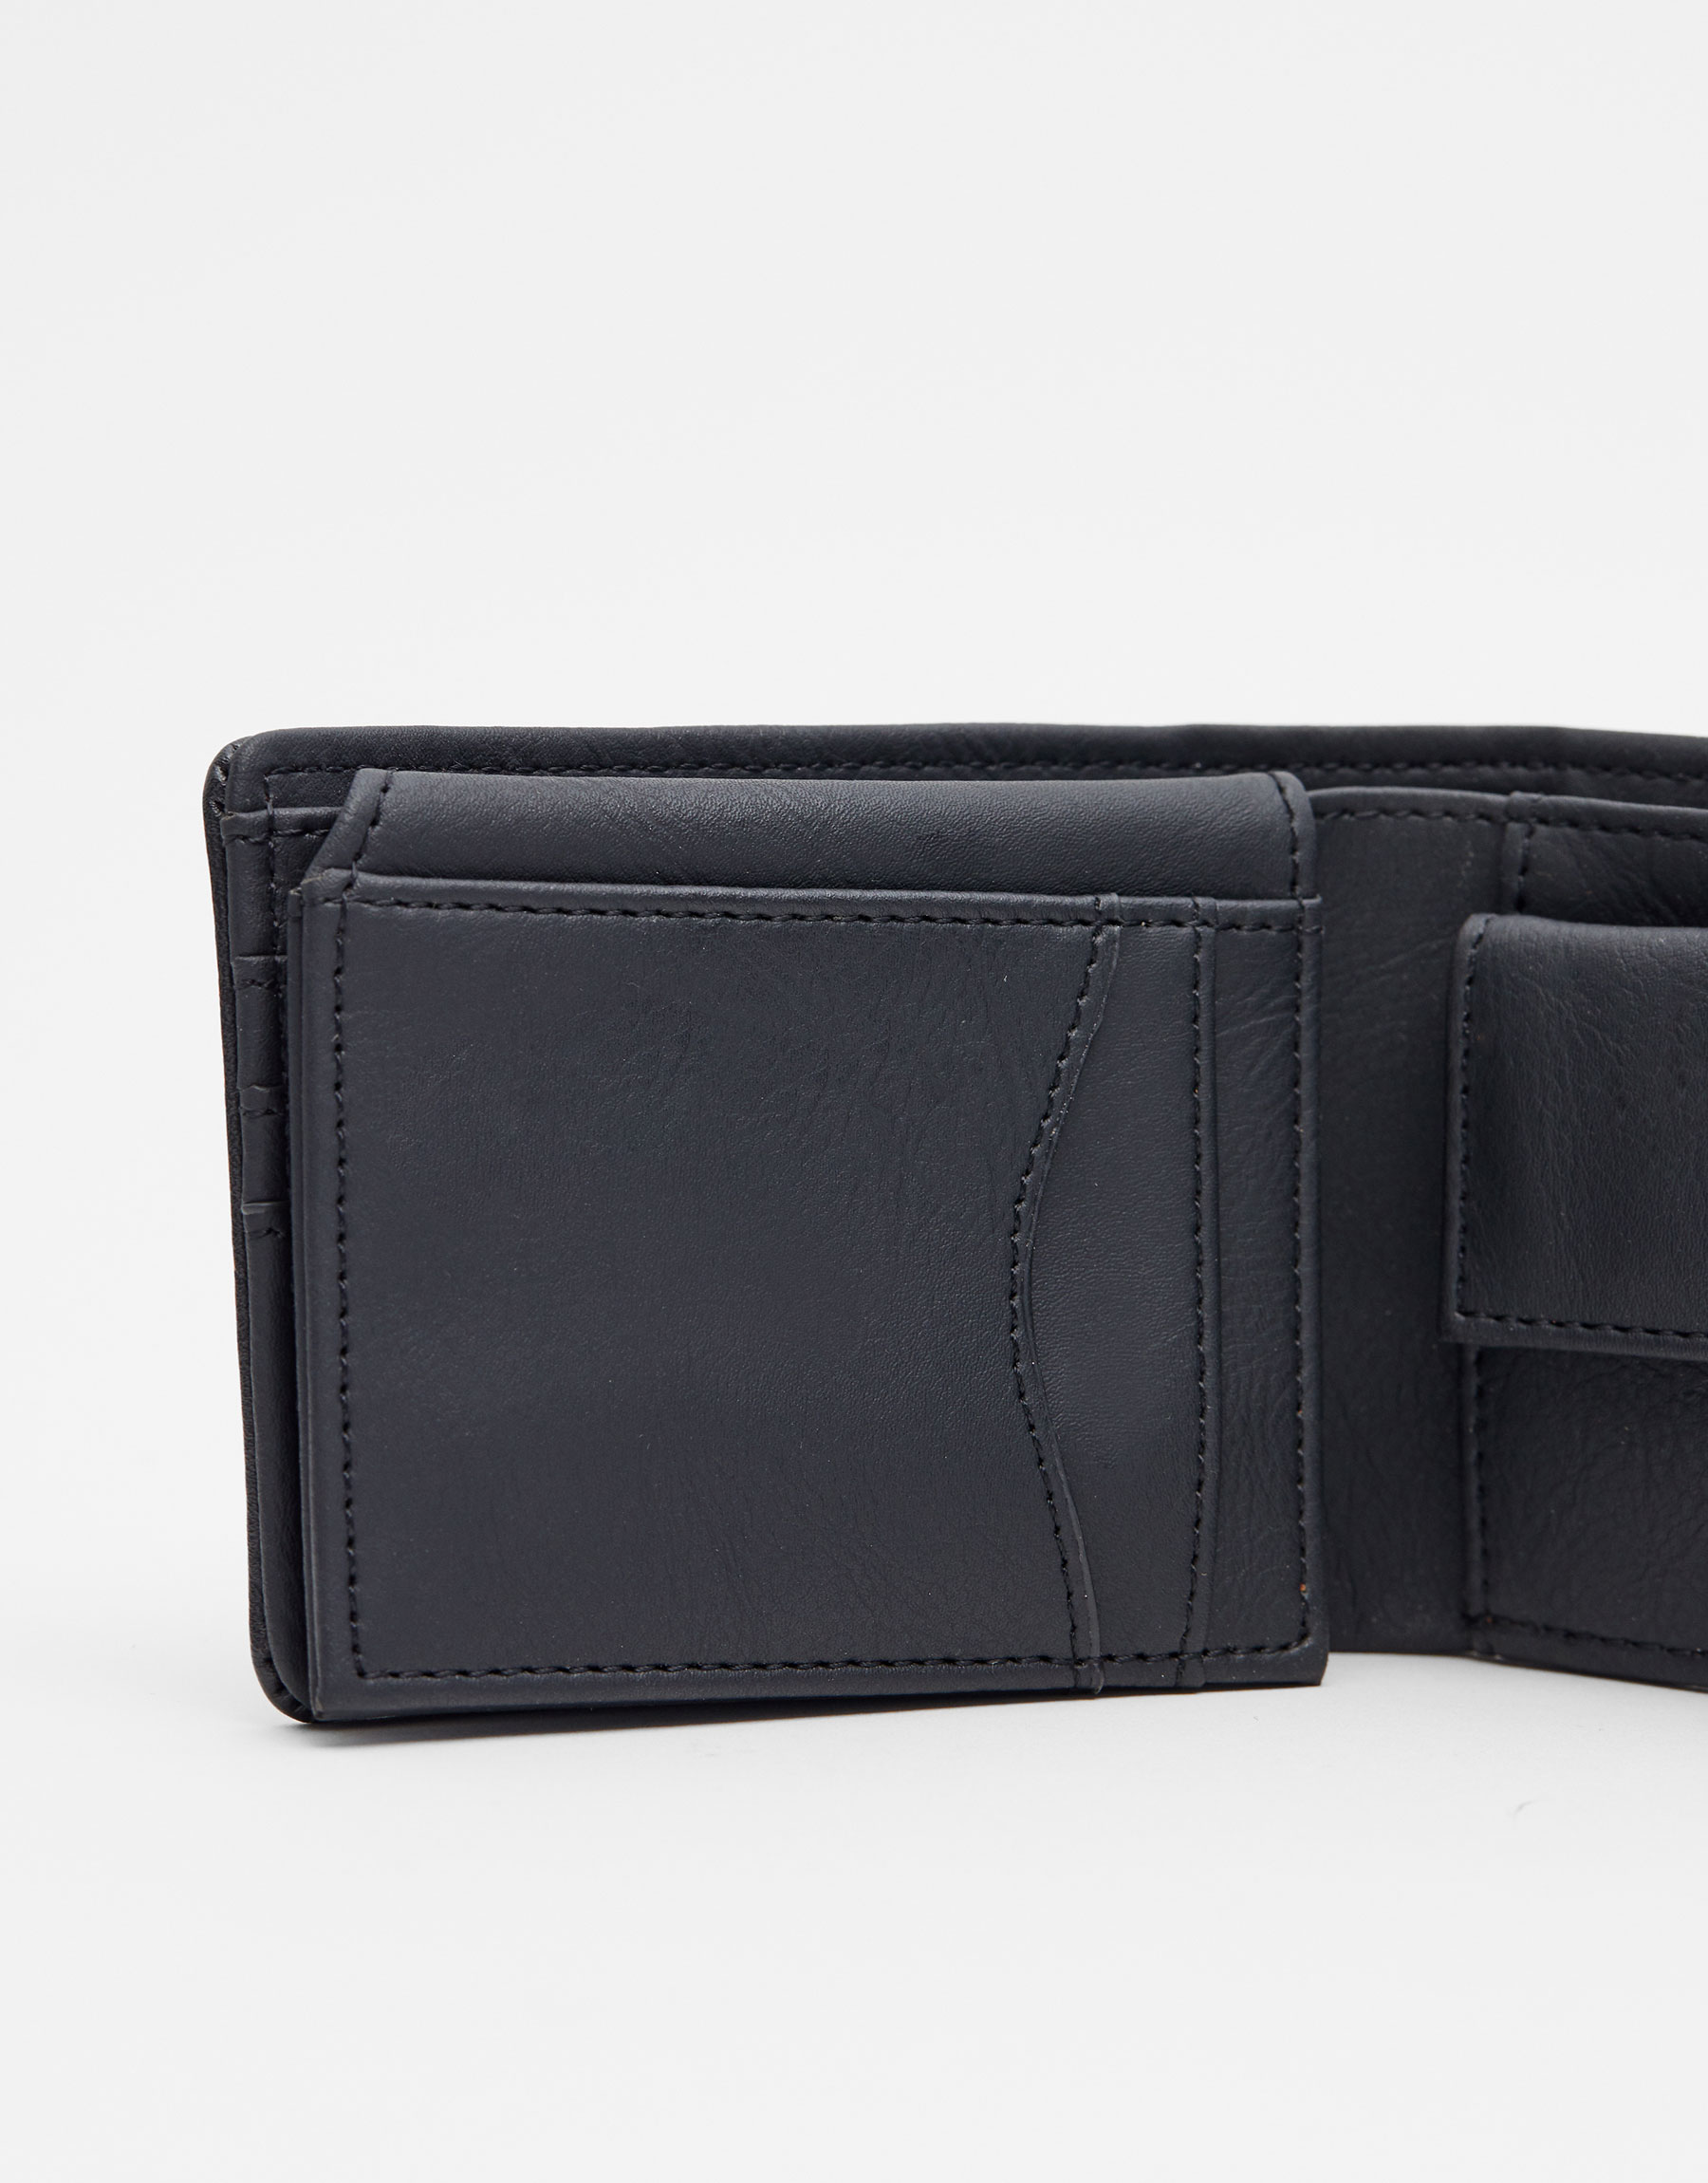 Pull & Bear Basic wallet at £14.99 | love the brands